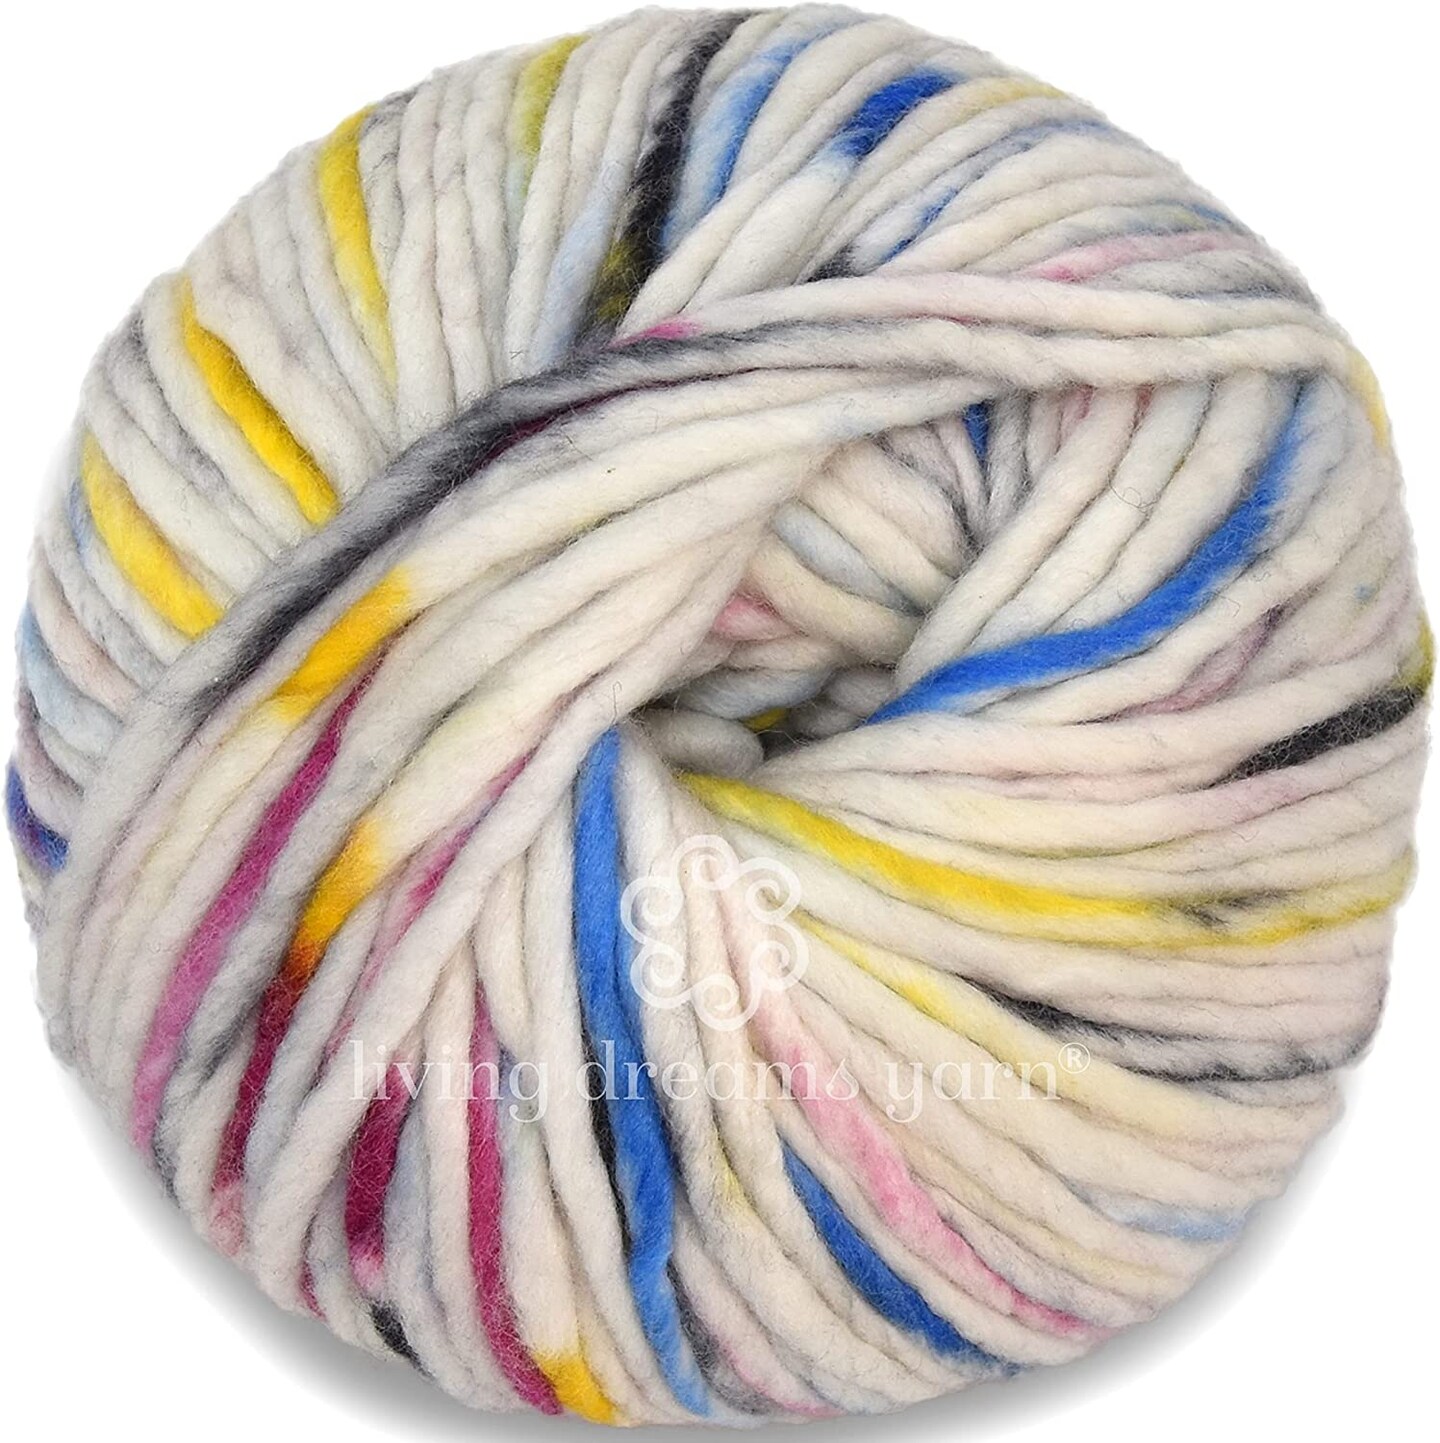 BAE: 100% Extrafine Merino Wool Bulky Weight Roving Yarn. Cuddly, Strong & Super Soft for Next to Skin Winter Knits.